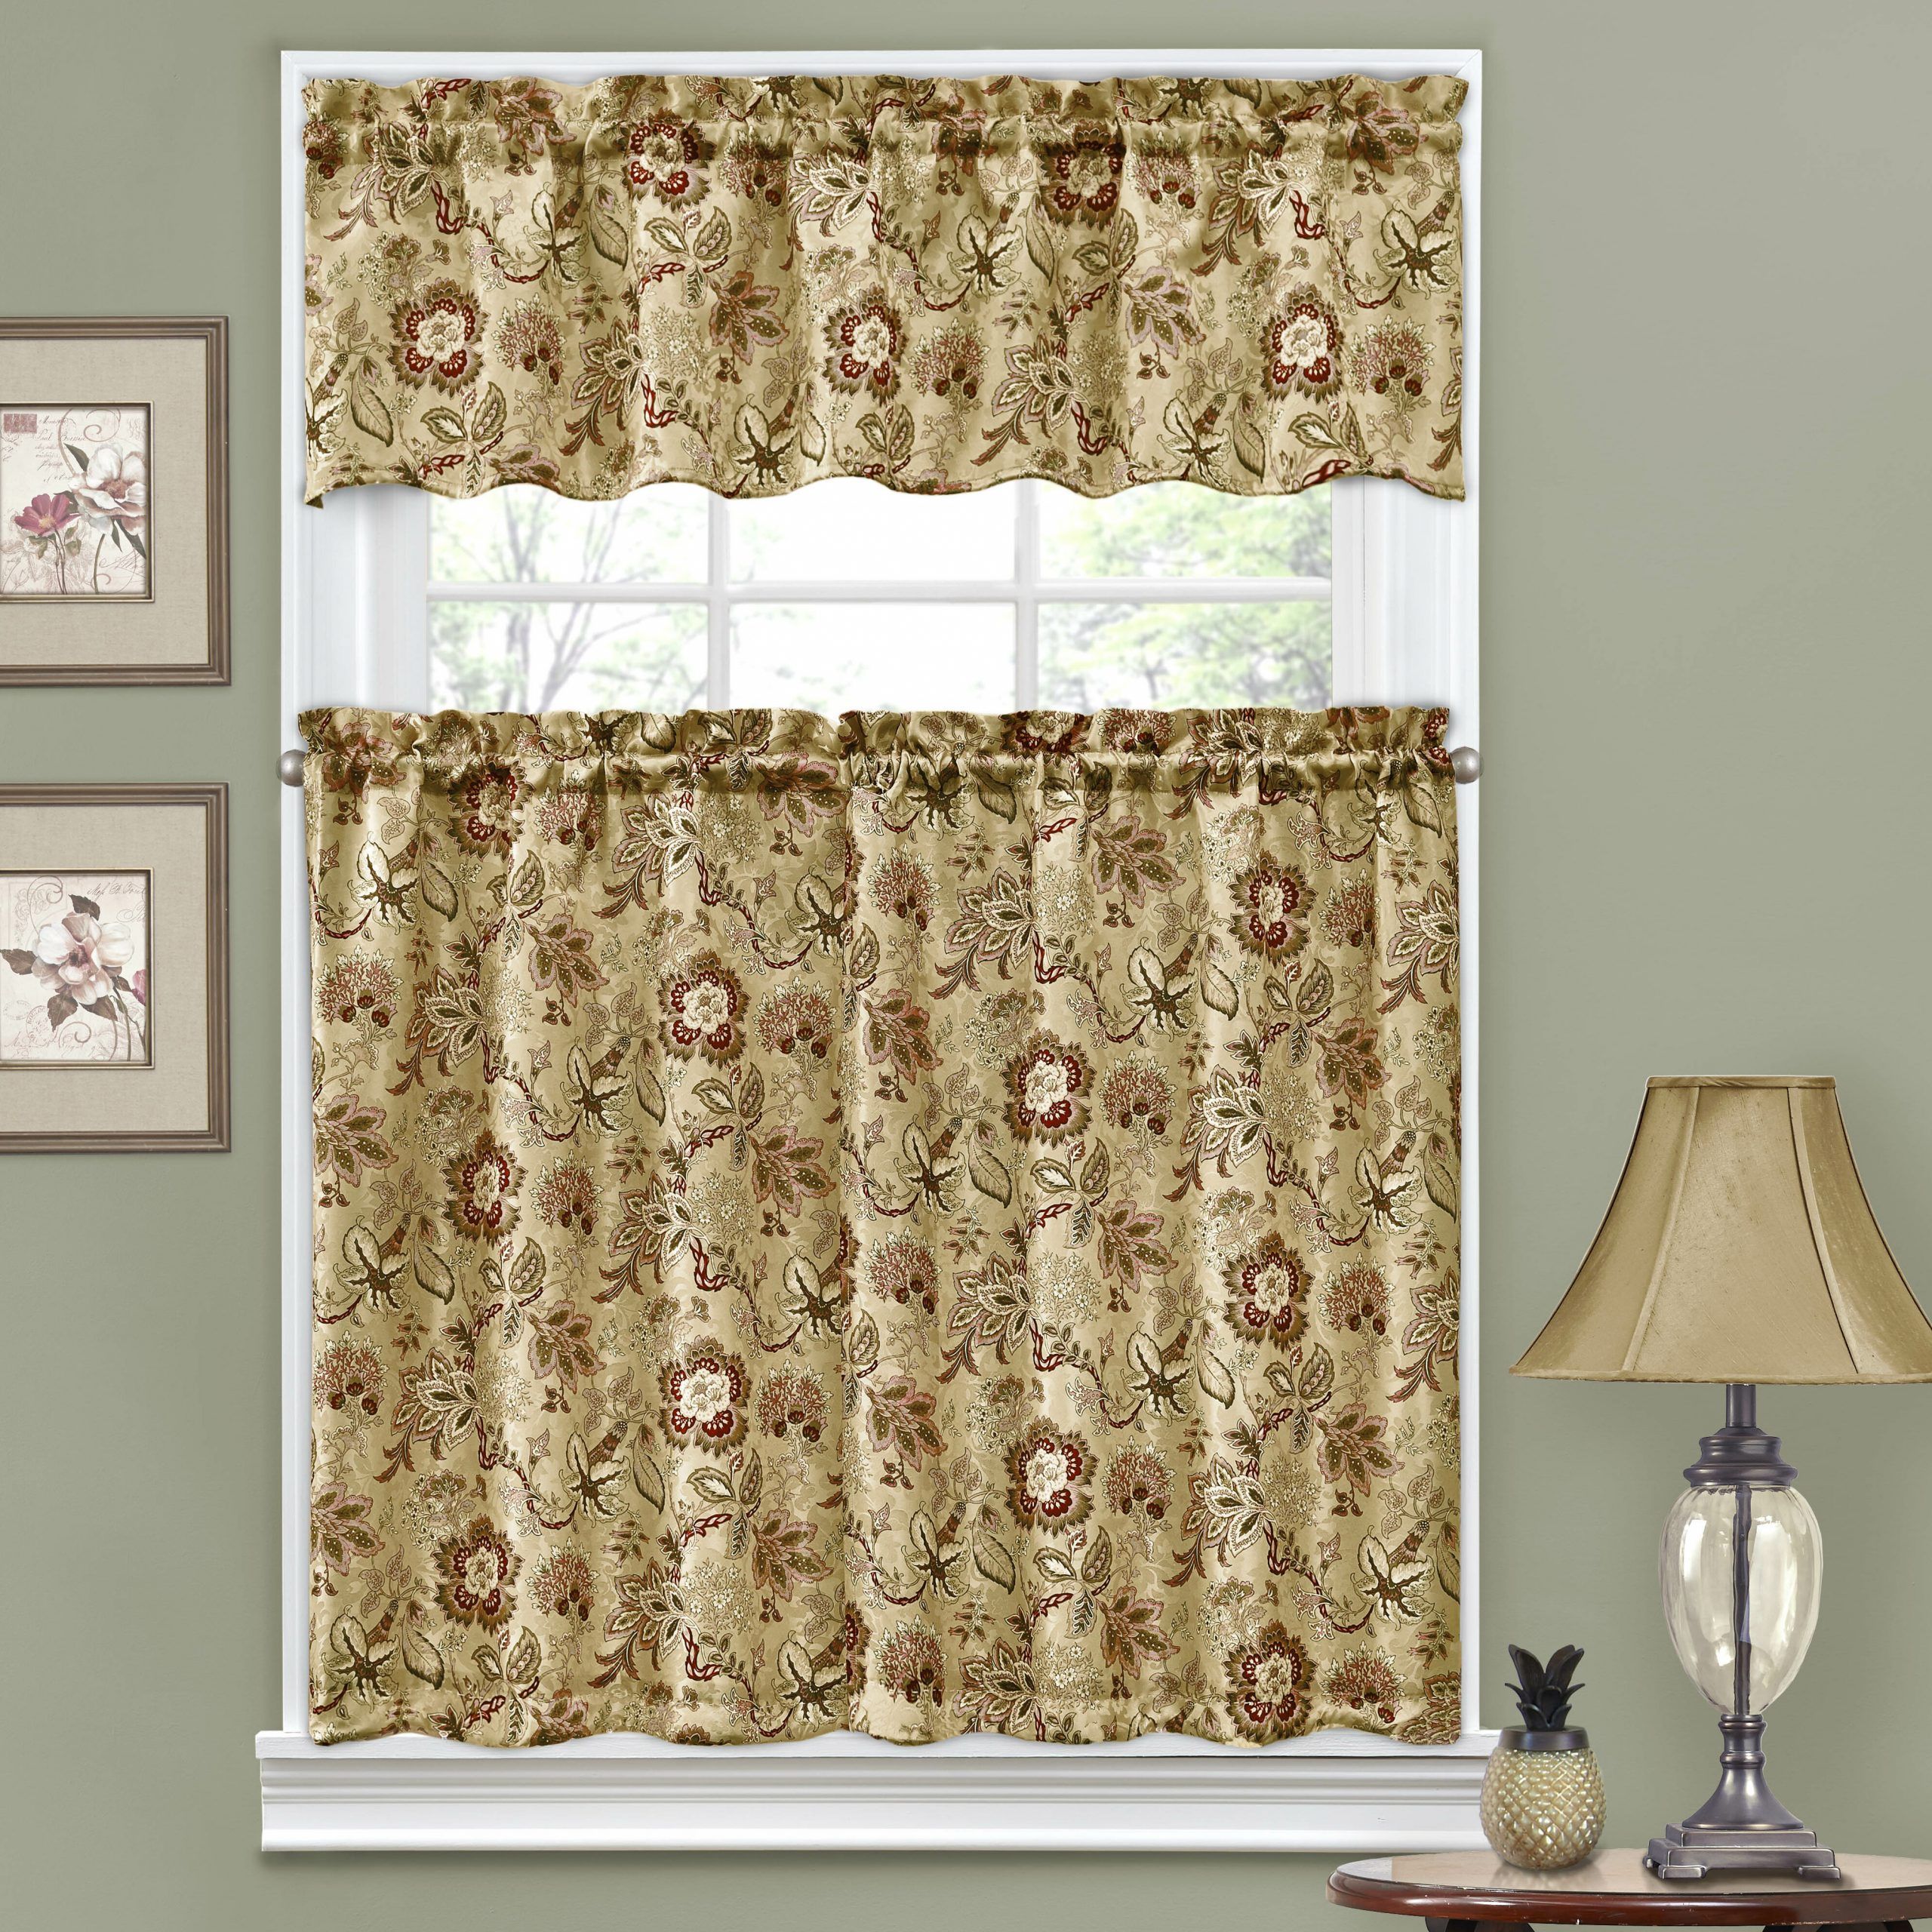 Navarra Floral 52" Valance And Tier Set In Floral Watercolor Semi Sheer Rod Pocket Kitchen Curtain Valance And Tiers Sets (Photo 4 of 20)